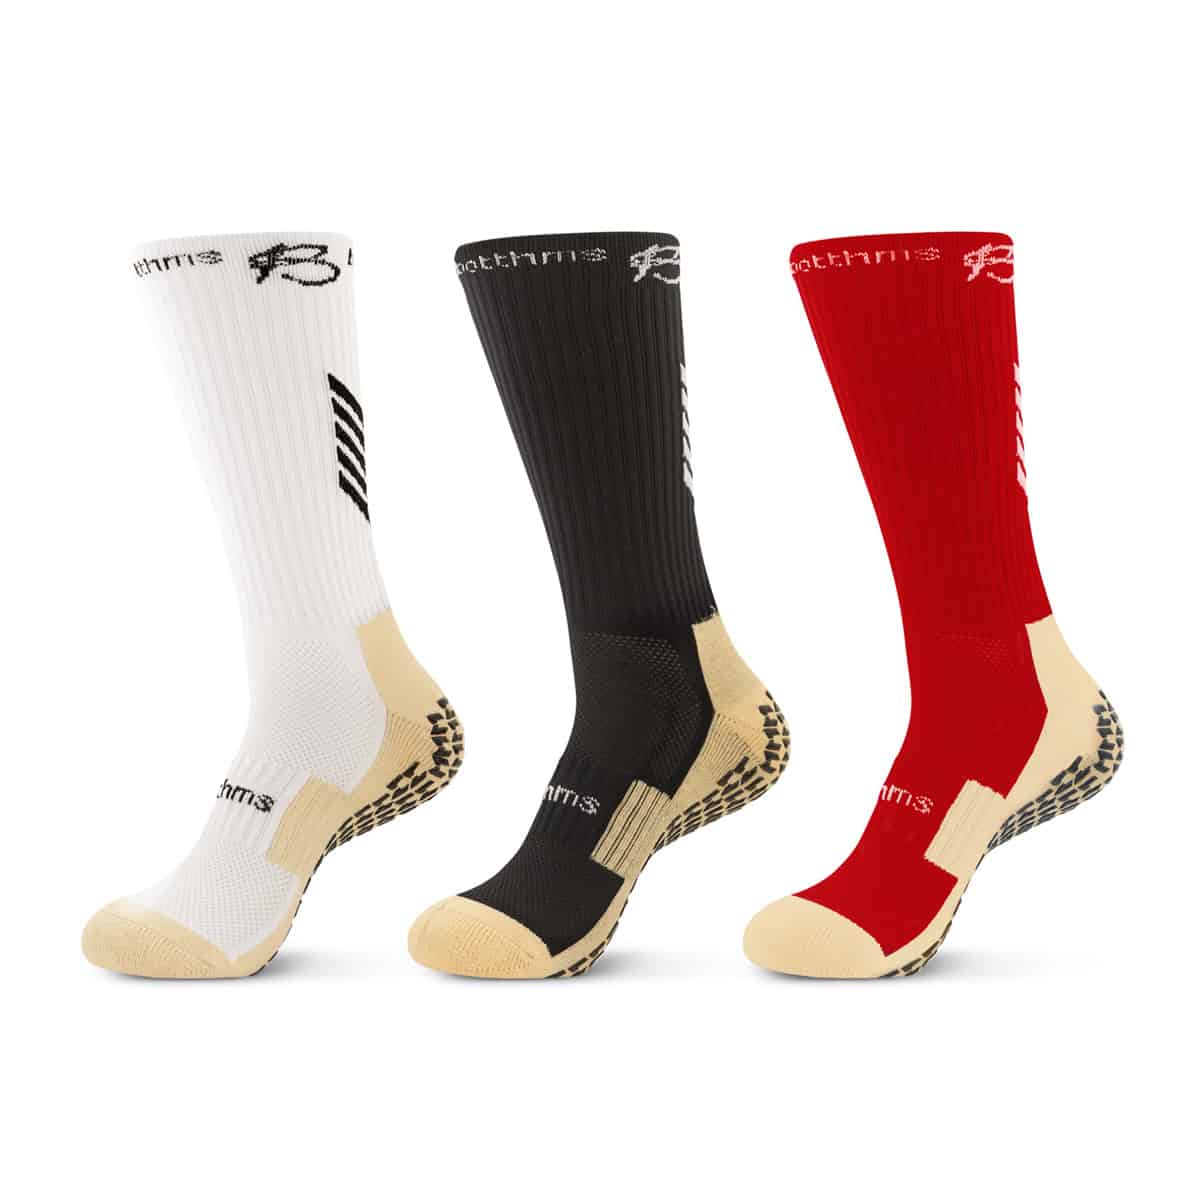 Grip Socks For Athletes Combo Pack - Shop Our Collection - Botthms